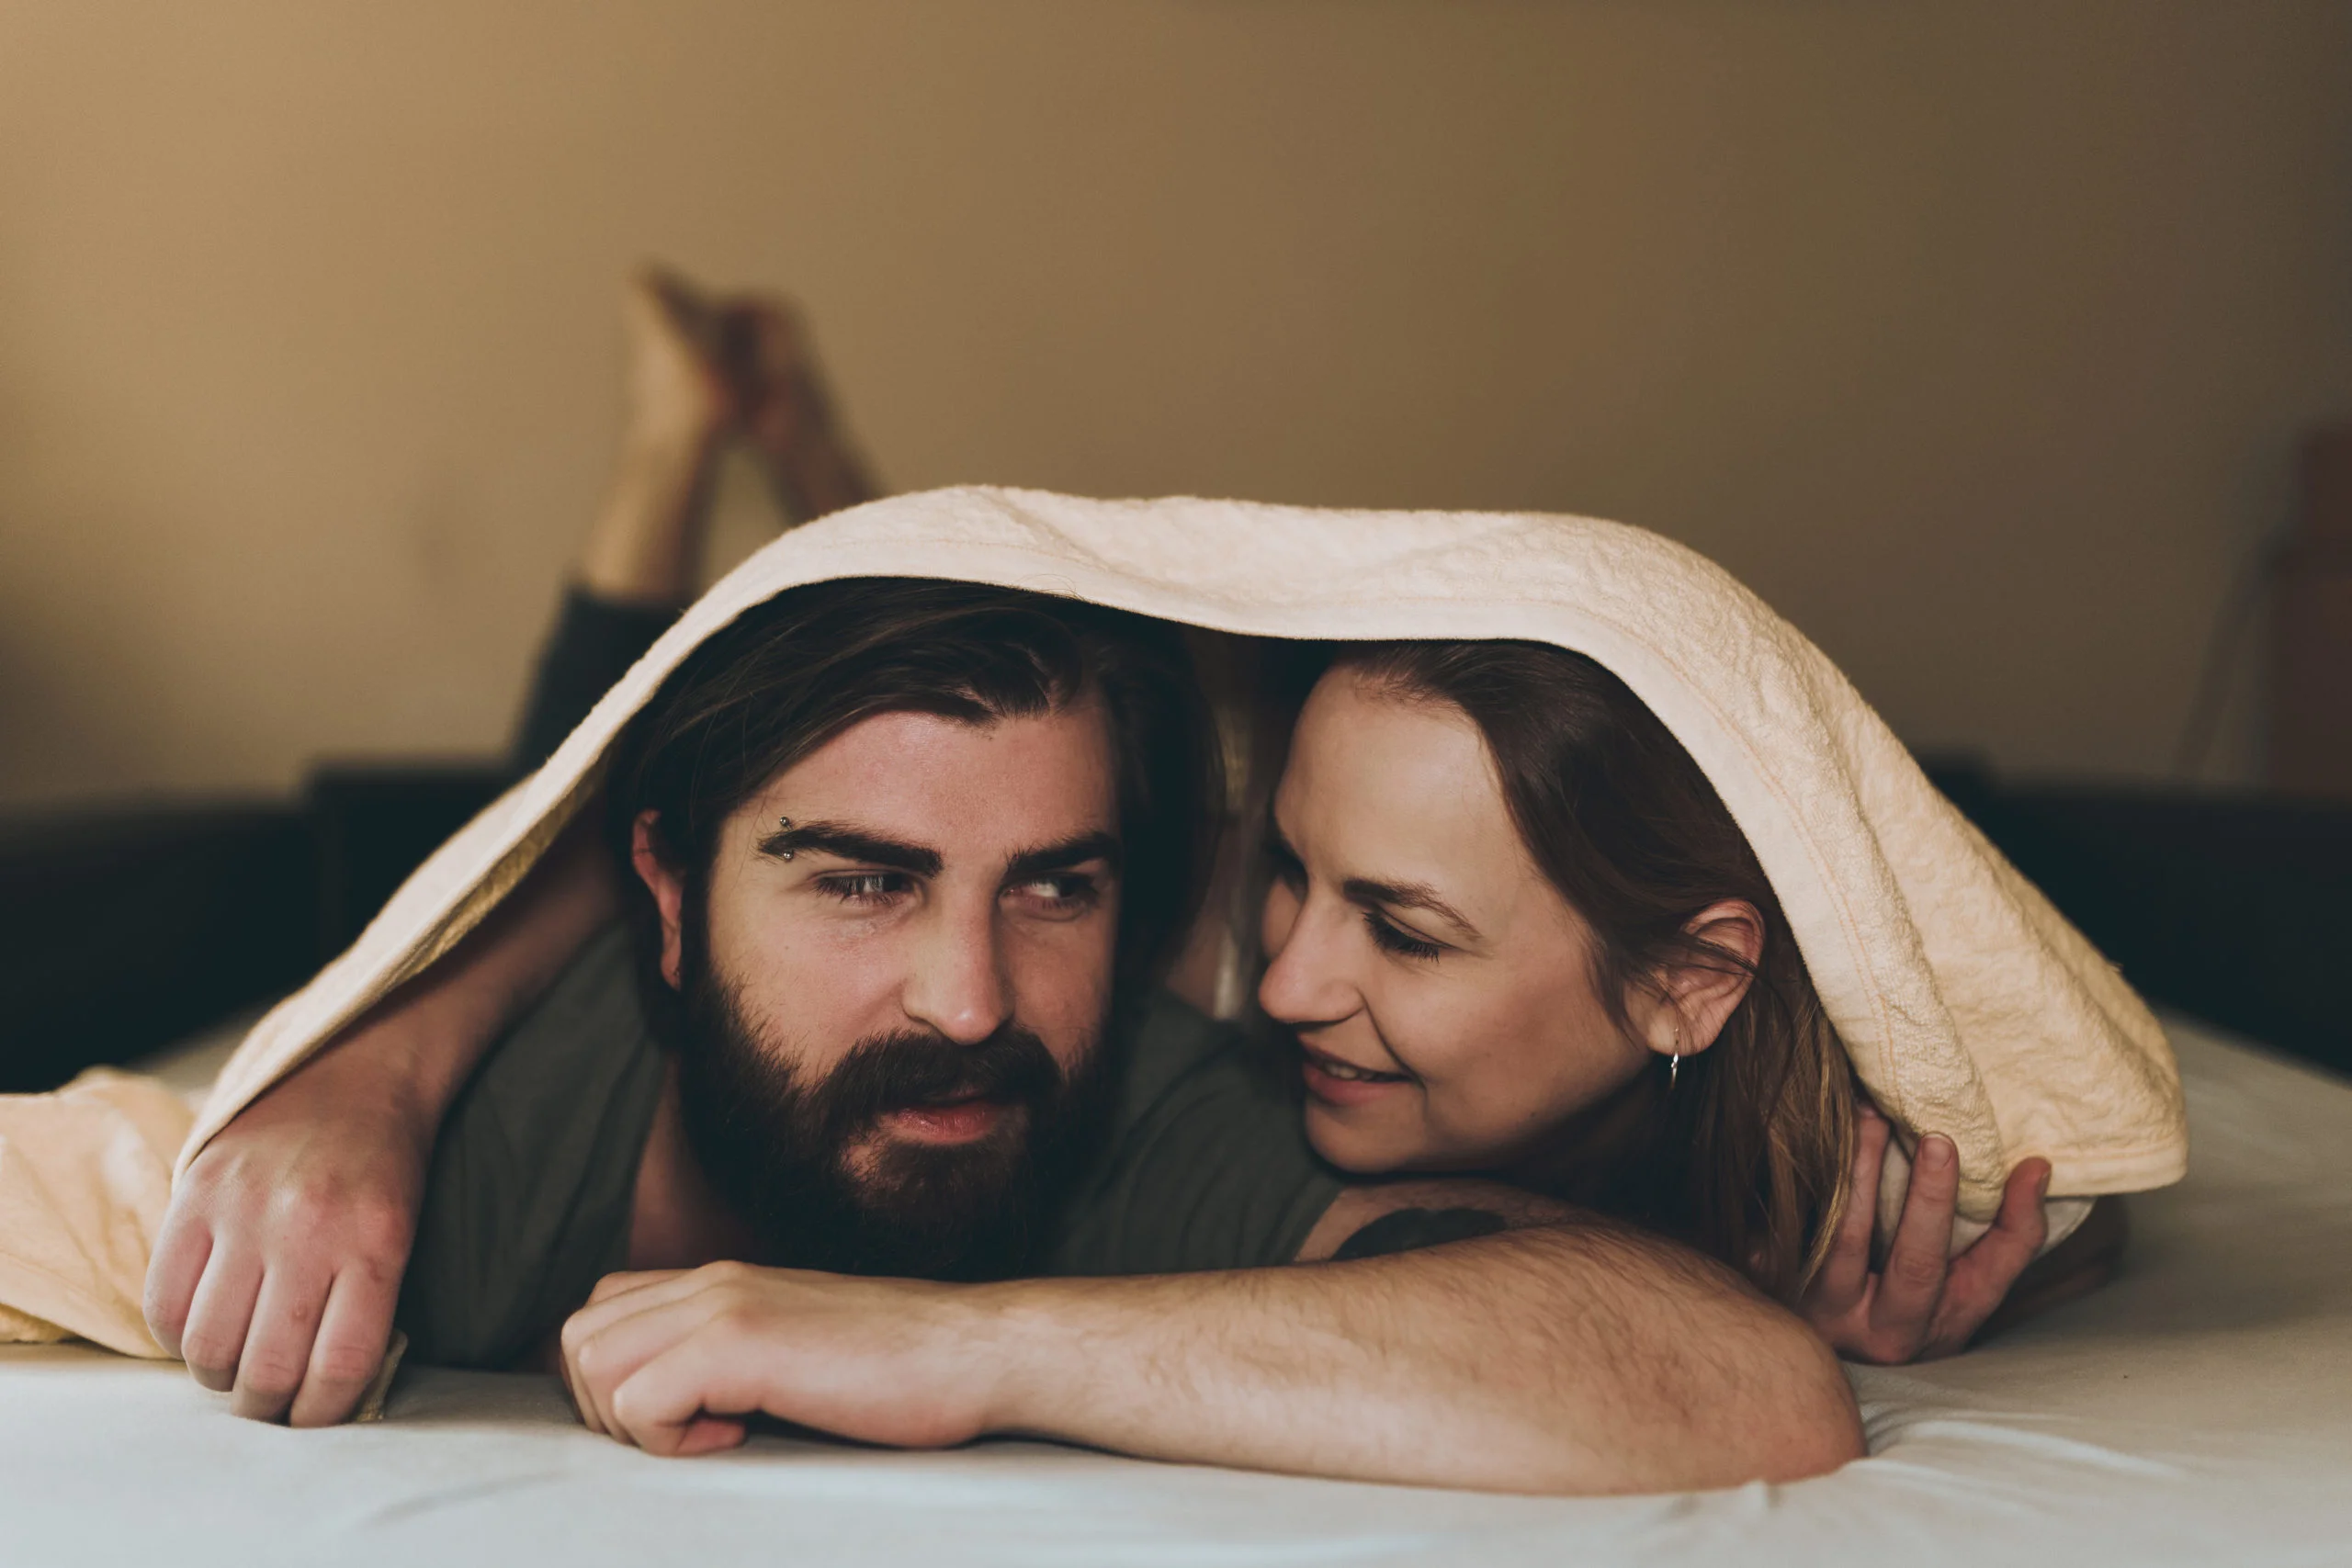 Can Just Sex Relationships Work? The Perks And Pitfalls